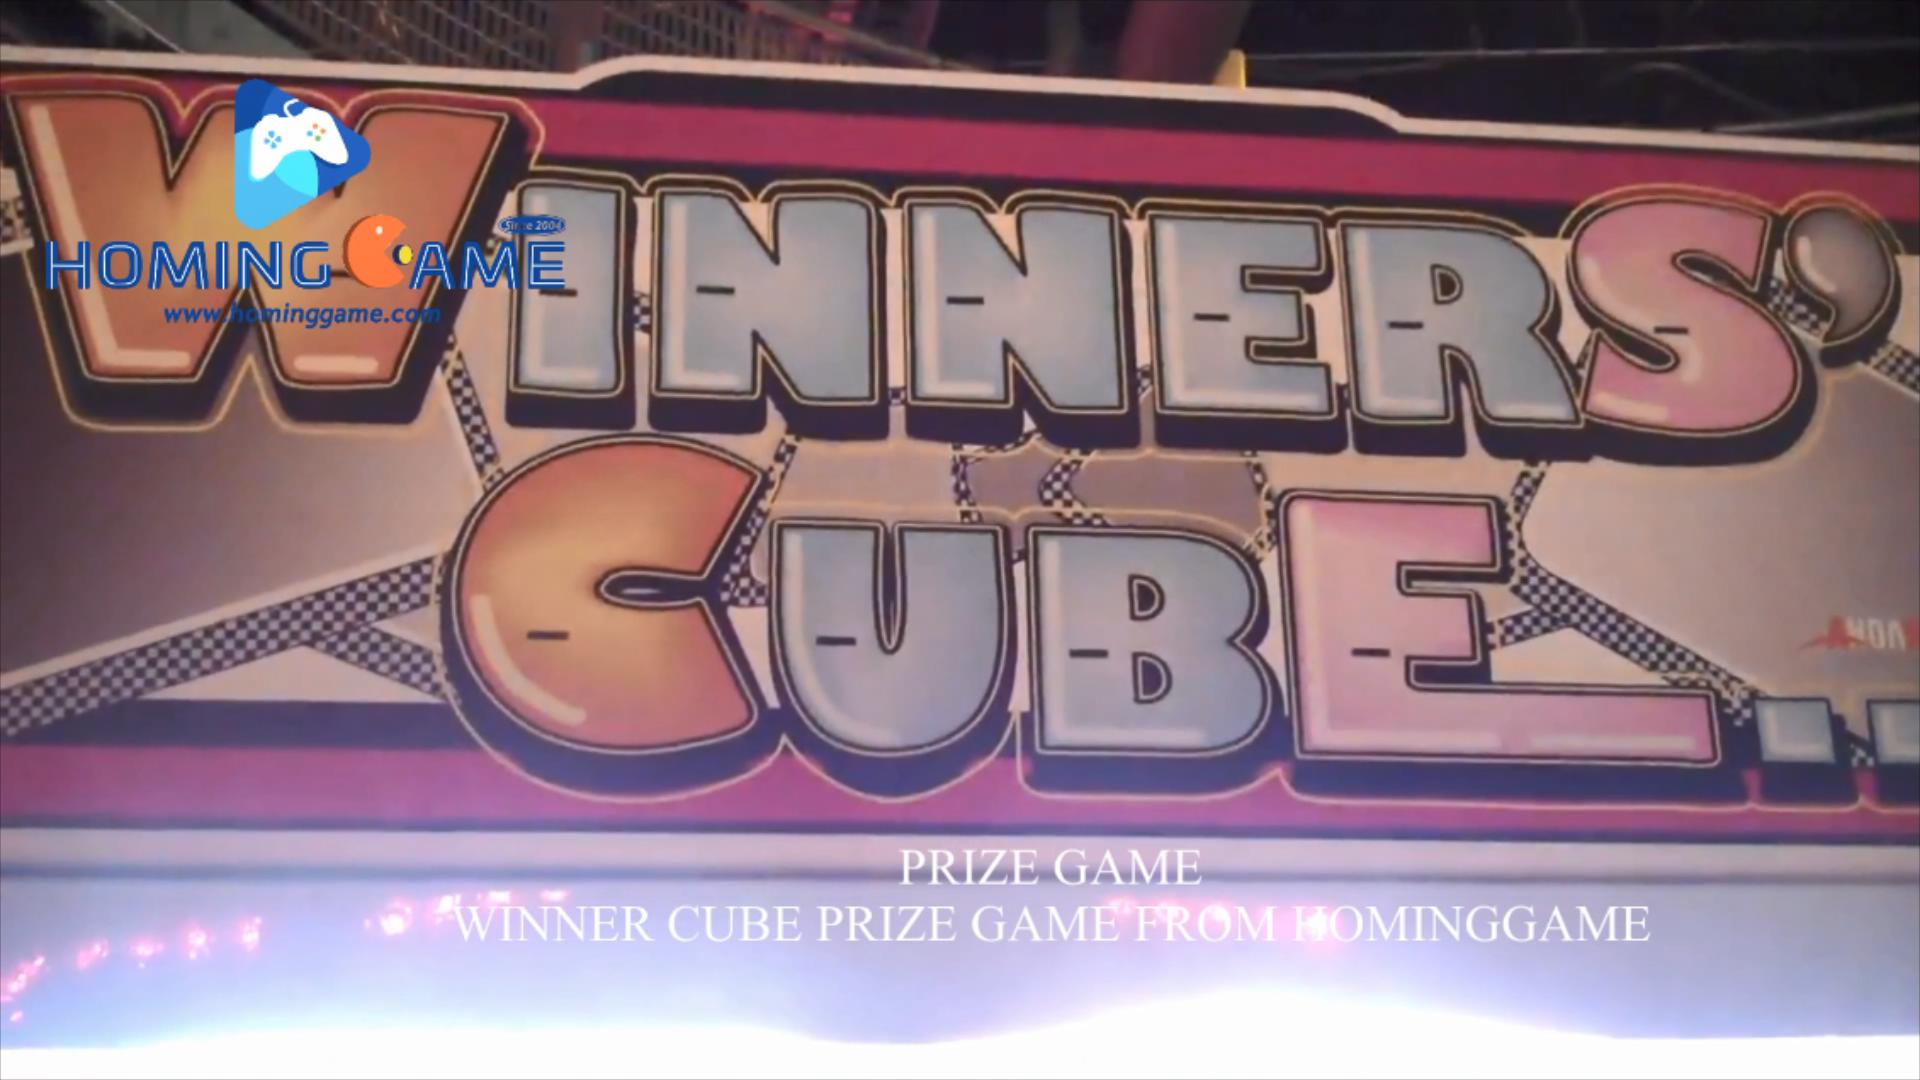 How to Play Prize Redemption Arcade Winner Cube